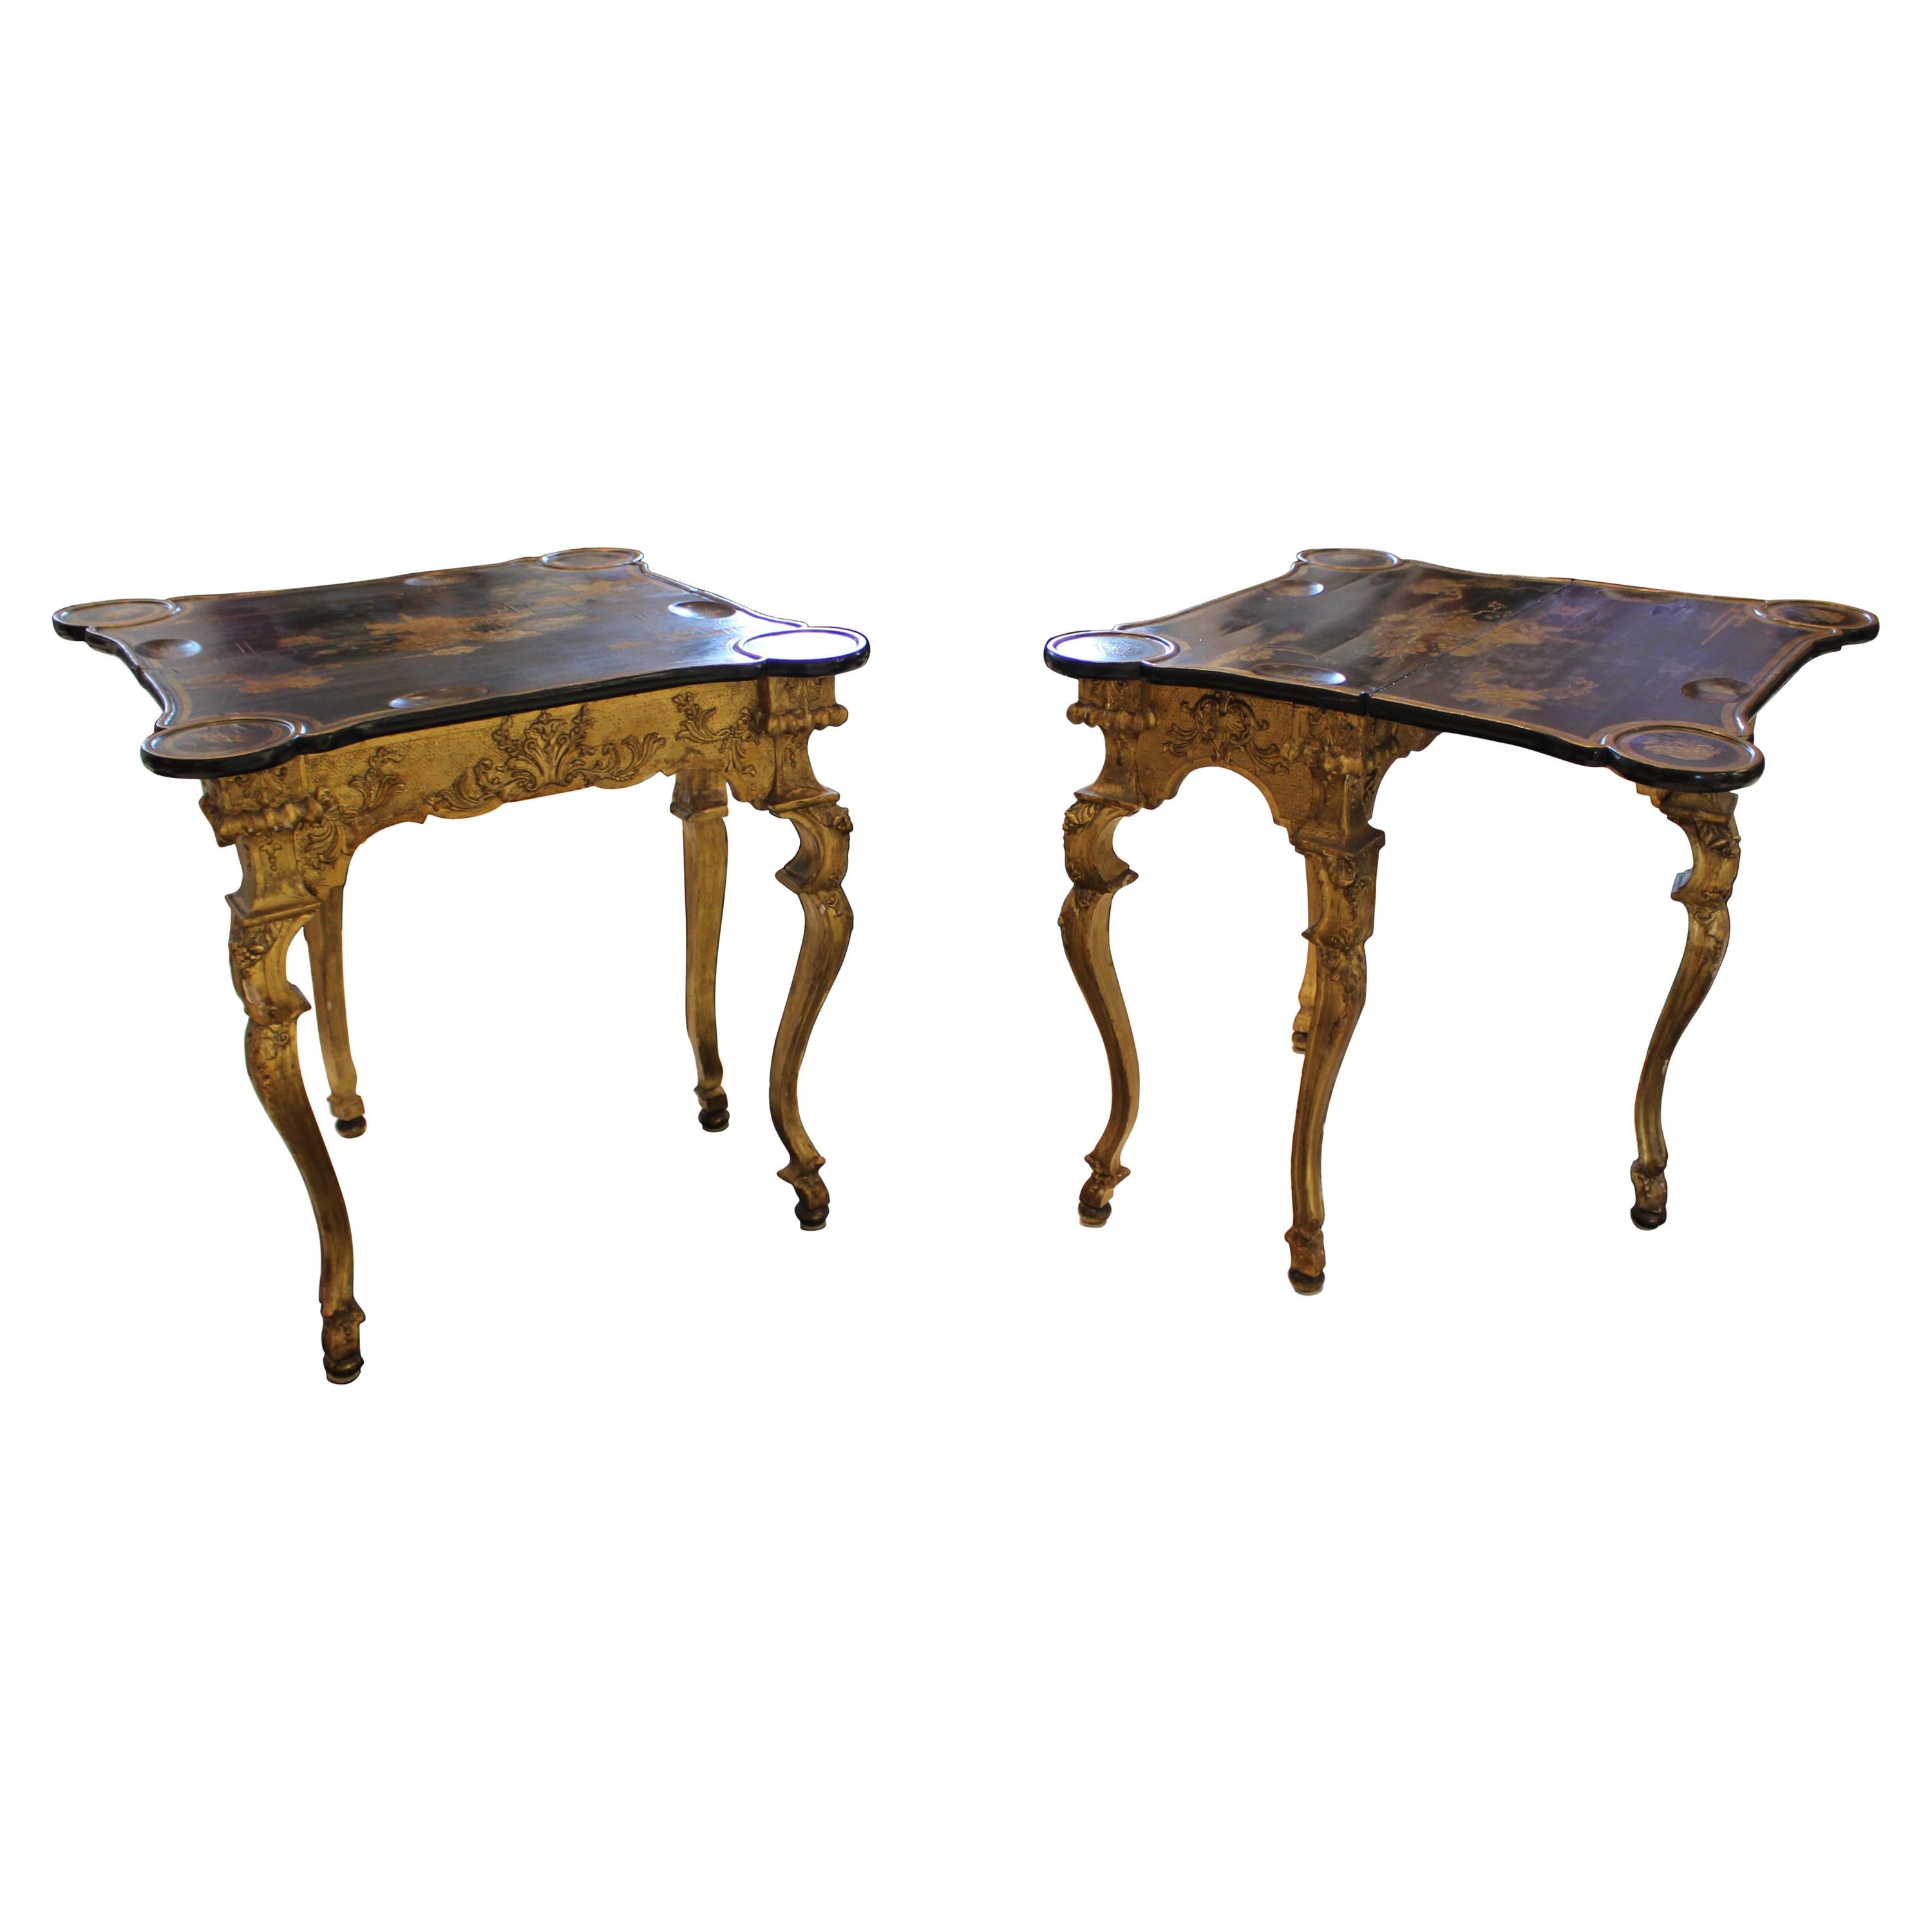 Pair of North European Giltwood Game Tables with Chinese Export Lacquer Tops